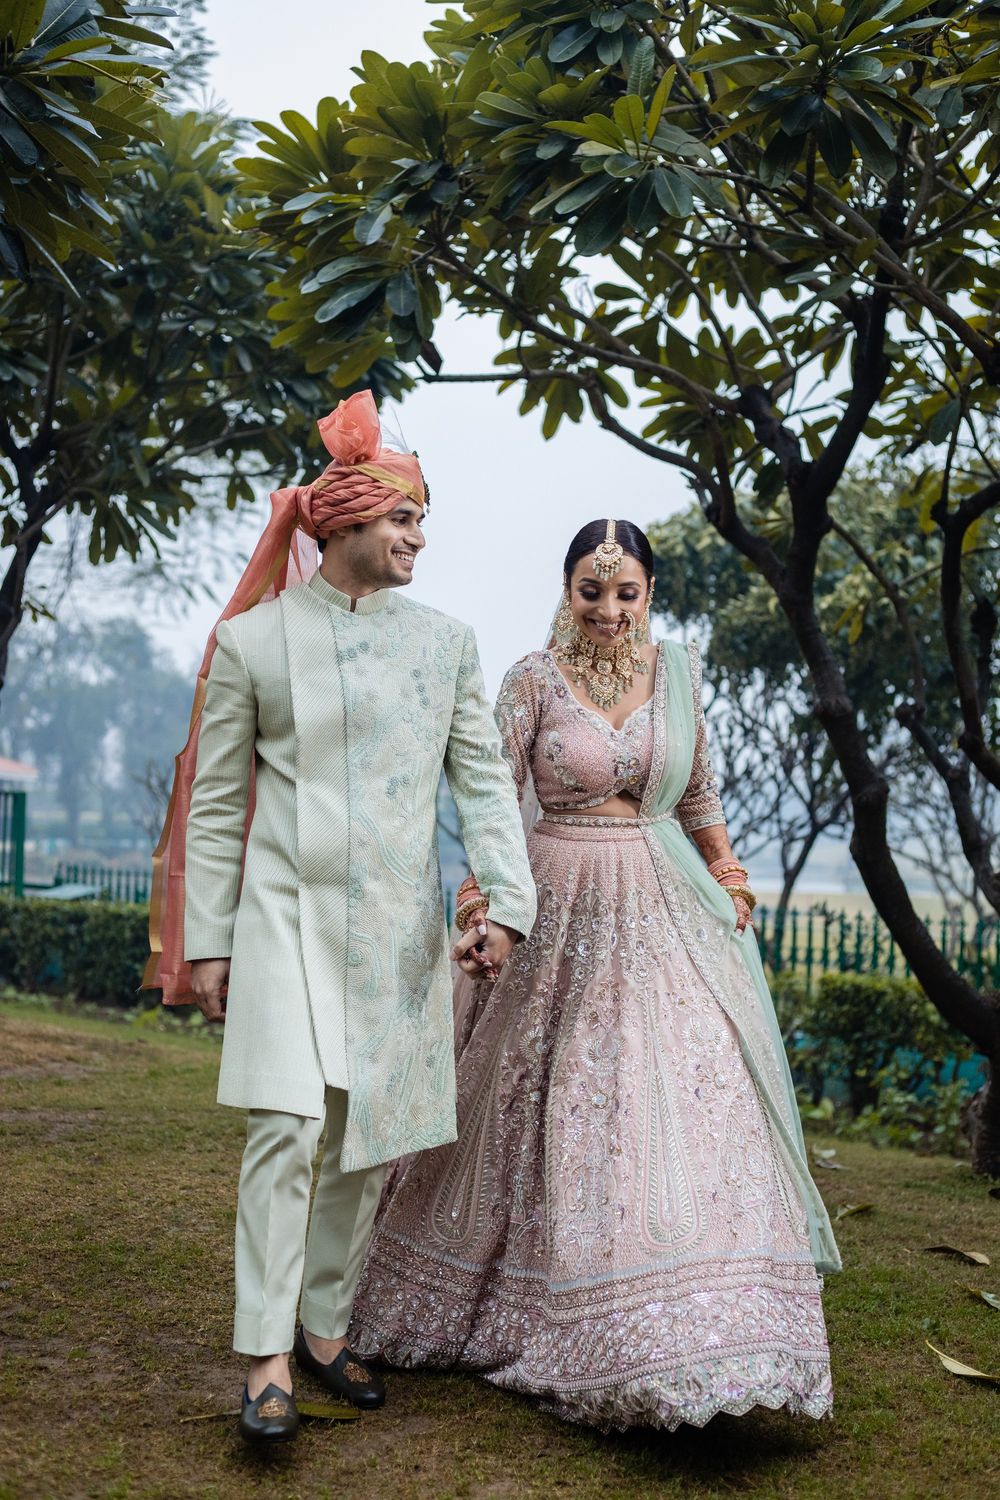 Photo of pretty couple photo with both bride and groom in pastel outfits